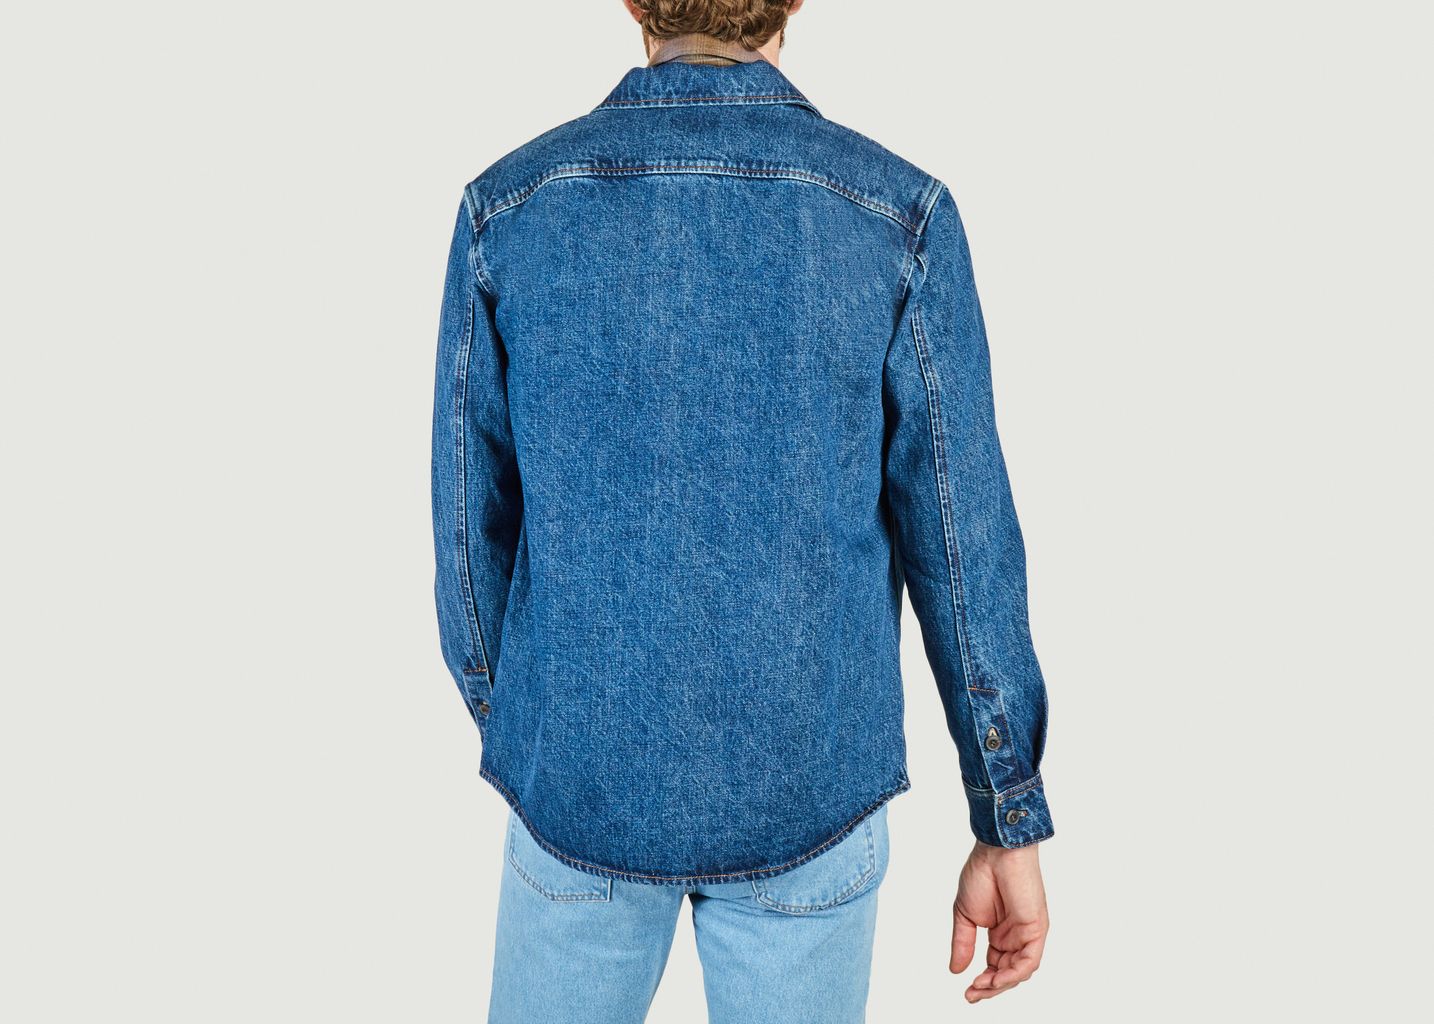 Vittorio overshirt Embroidered chest - A.P.C.